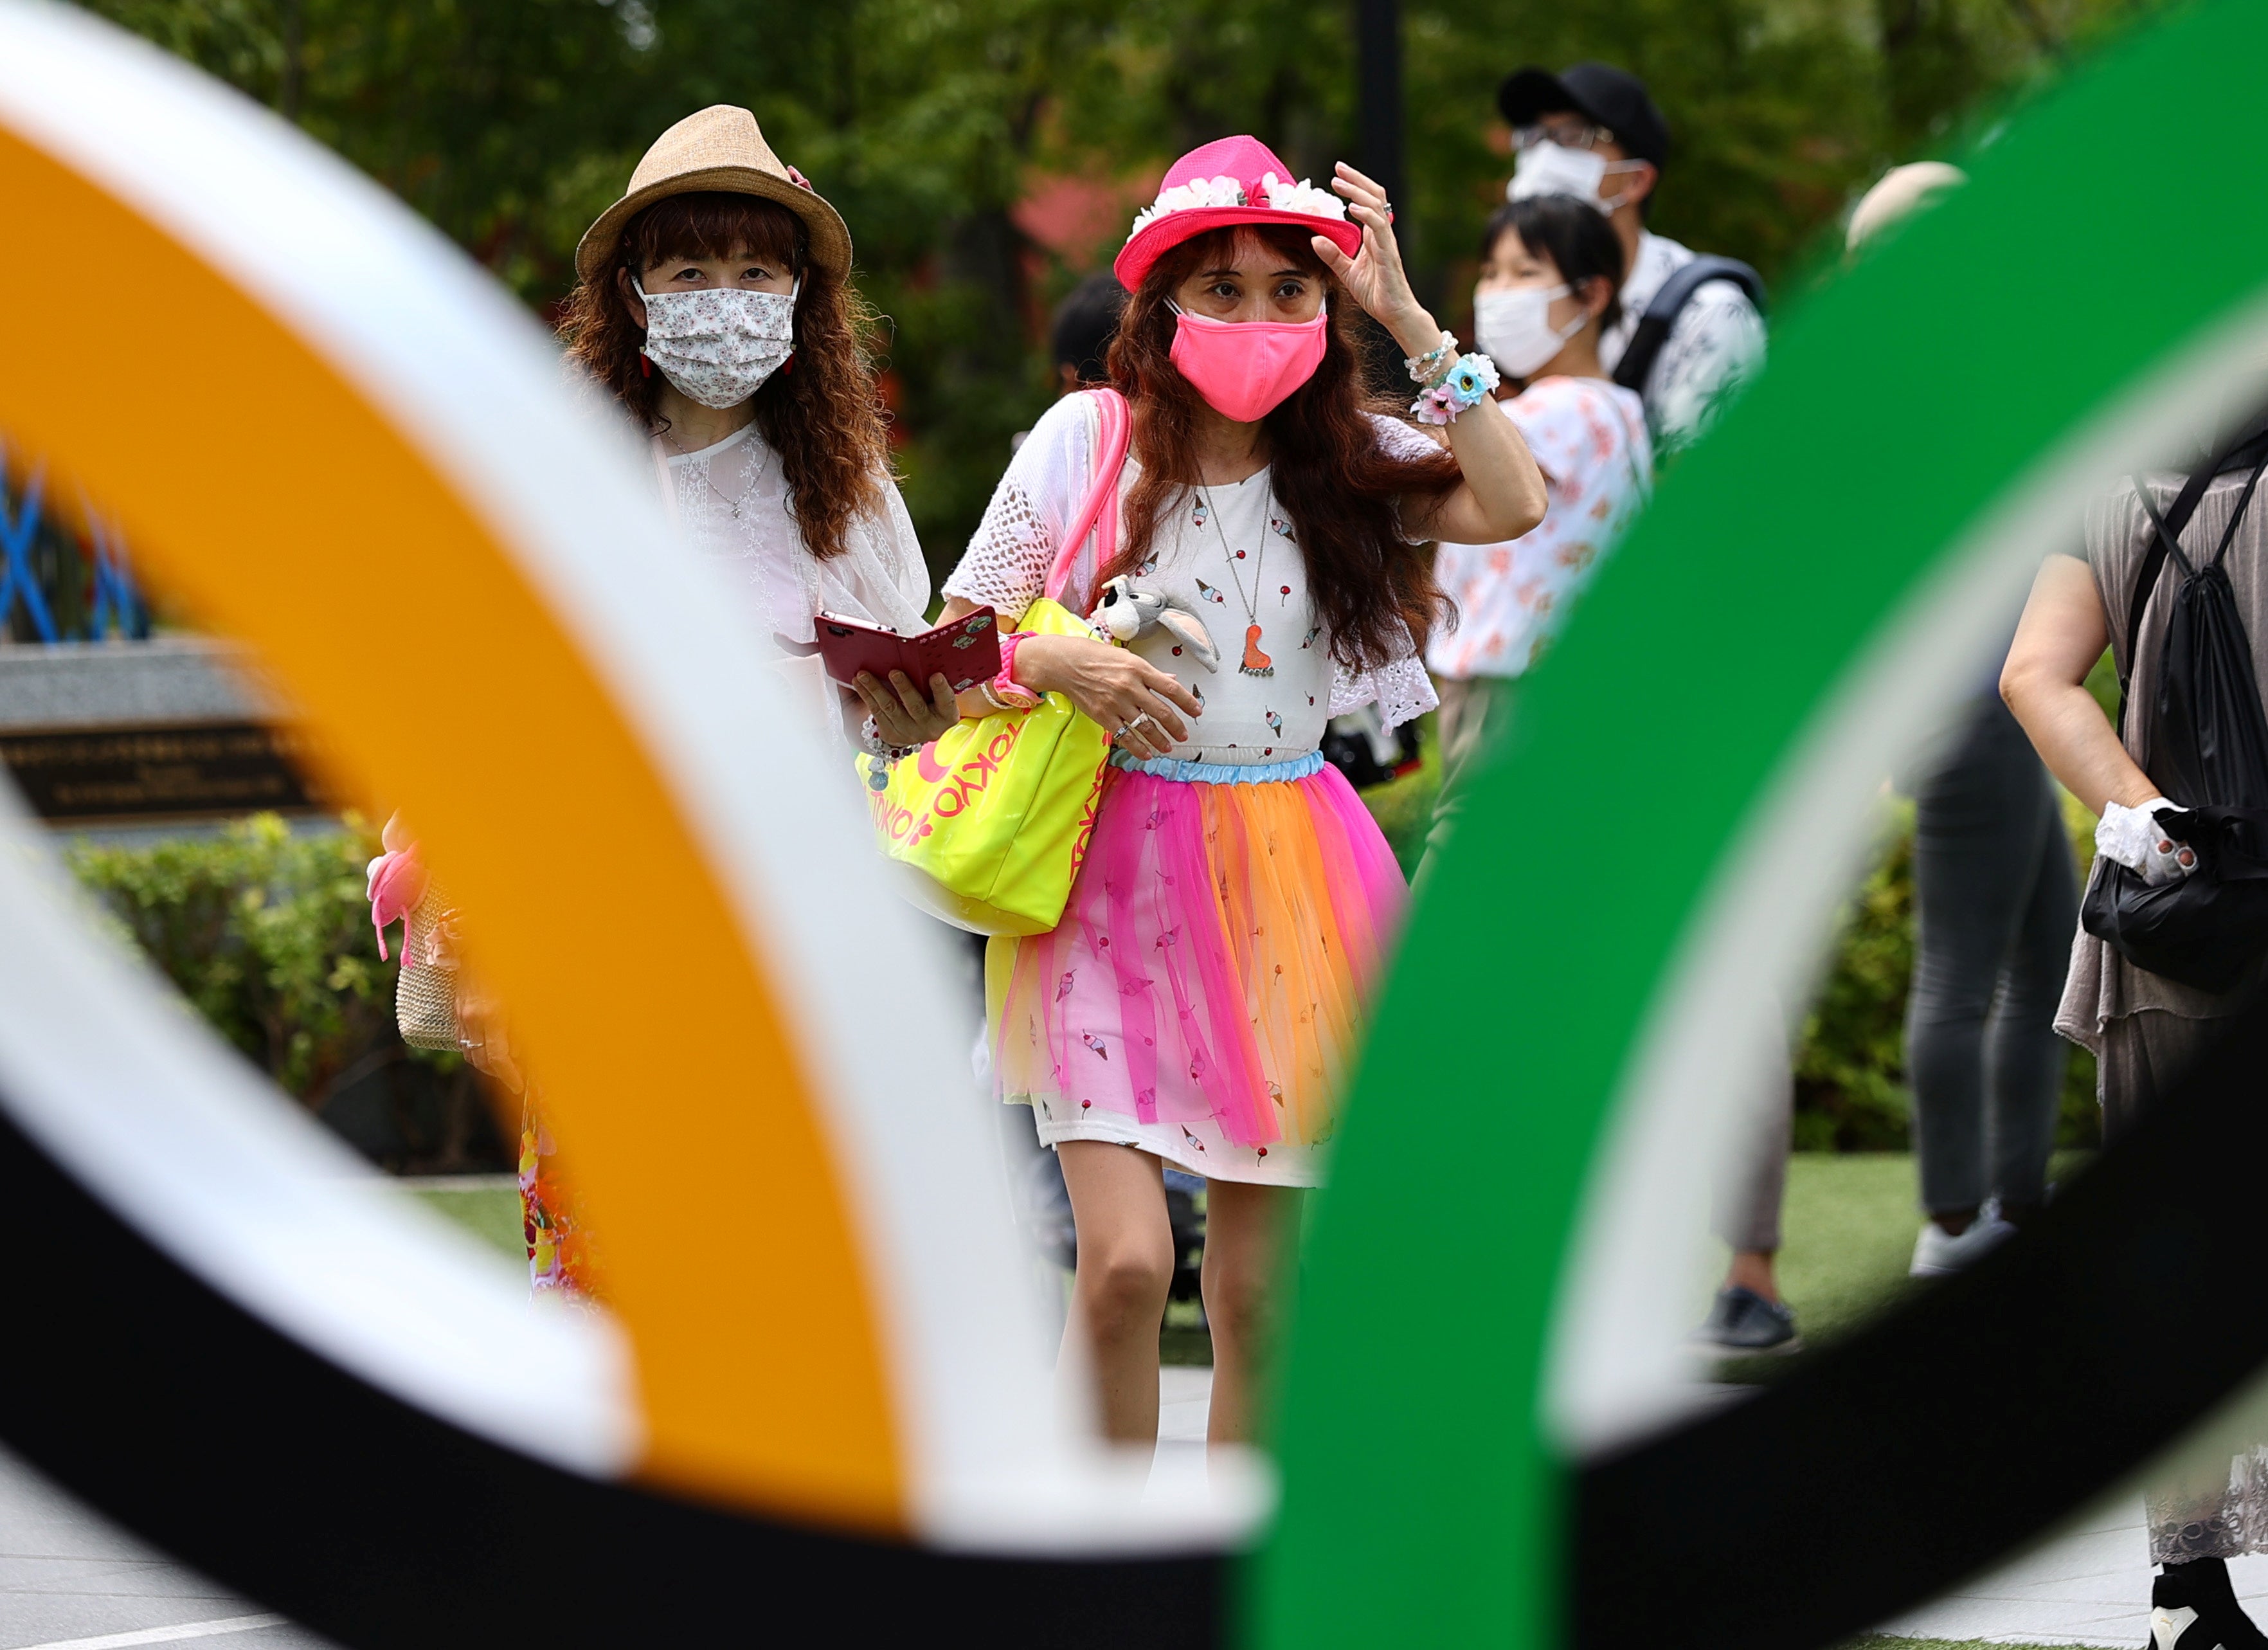 People wearing protective face masks amid the coronavirus disease outbreak visit an Olympic Ring outside the National Stadium, the main venue of the Tokyo 2020 Olympic Games